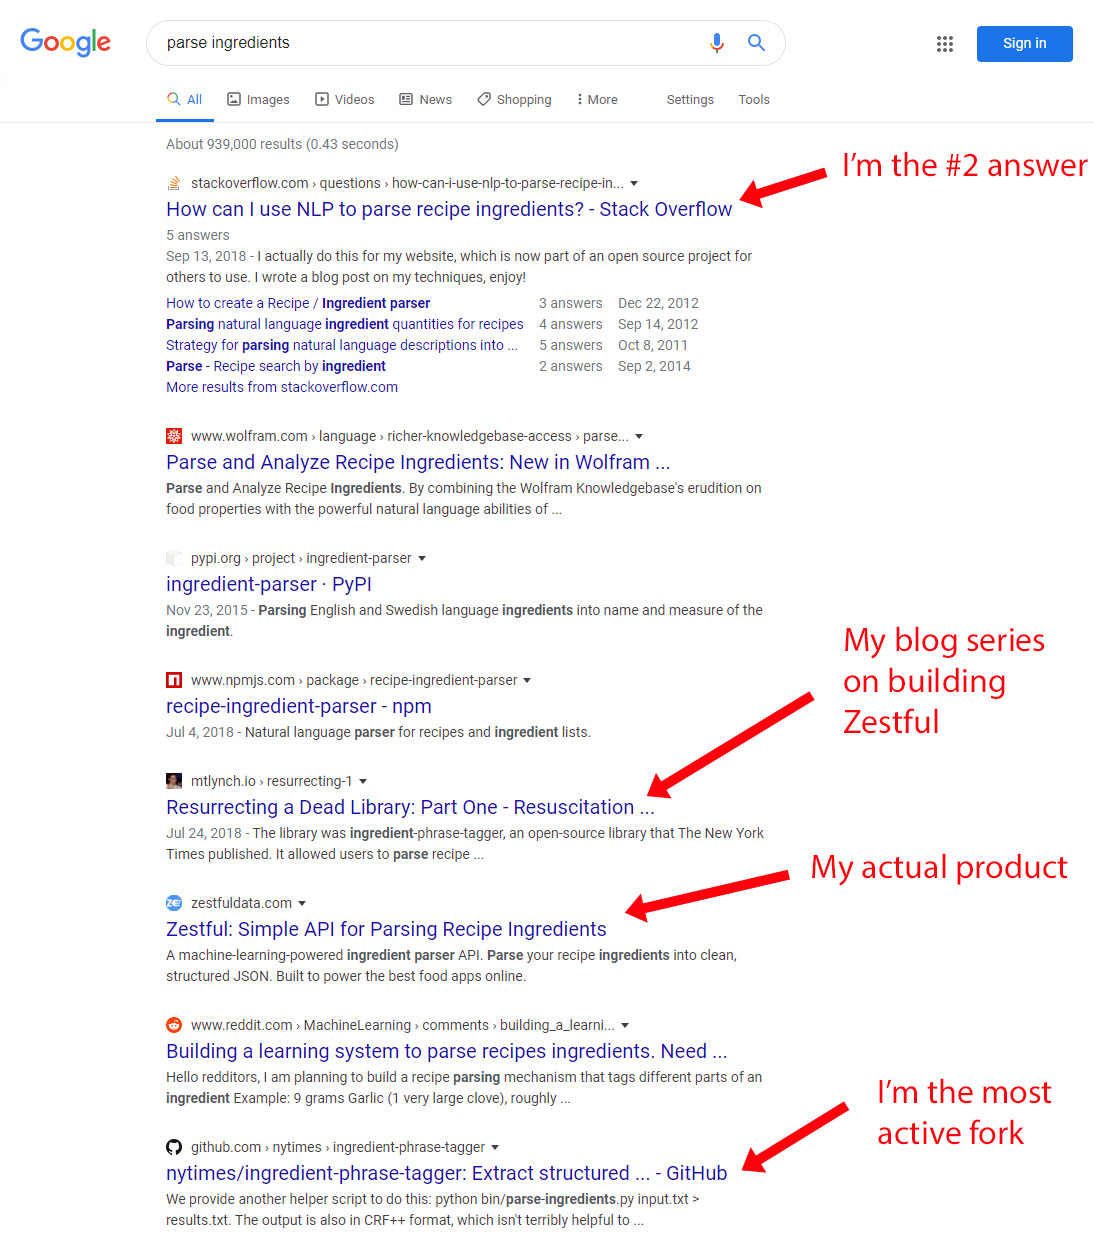 Screenshot of Zestful's appearances in Google search results